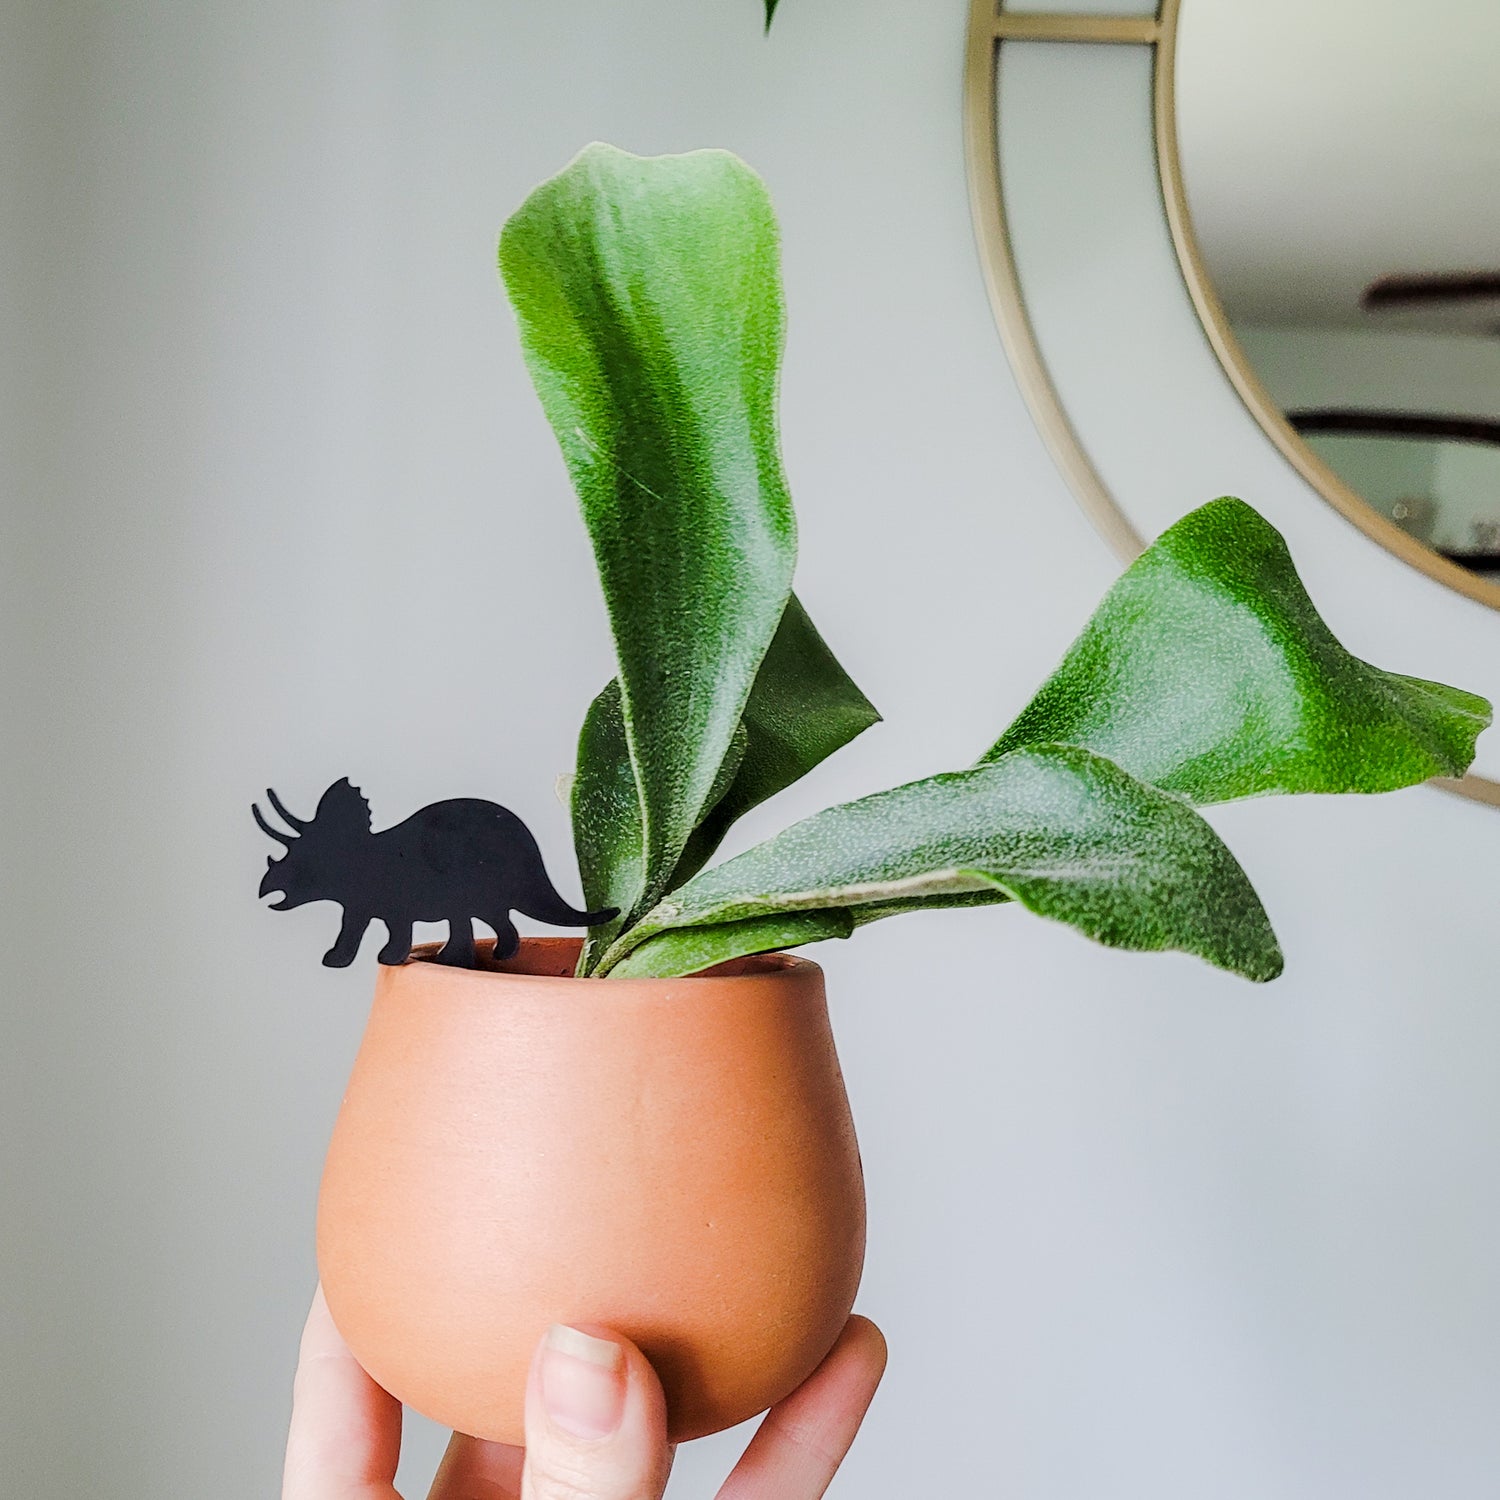 Mini Triceratops plant stake made from black acrylic displayed in 3 inch pot with a houseplant held in hand for size perspective.